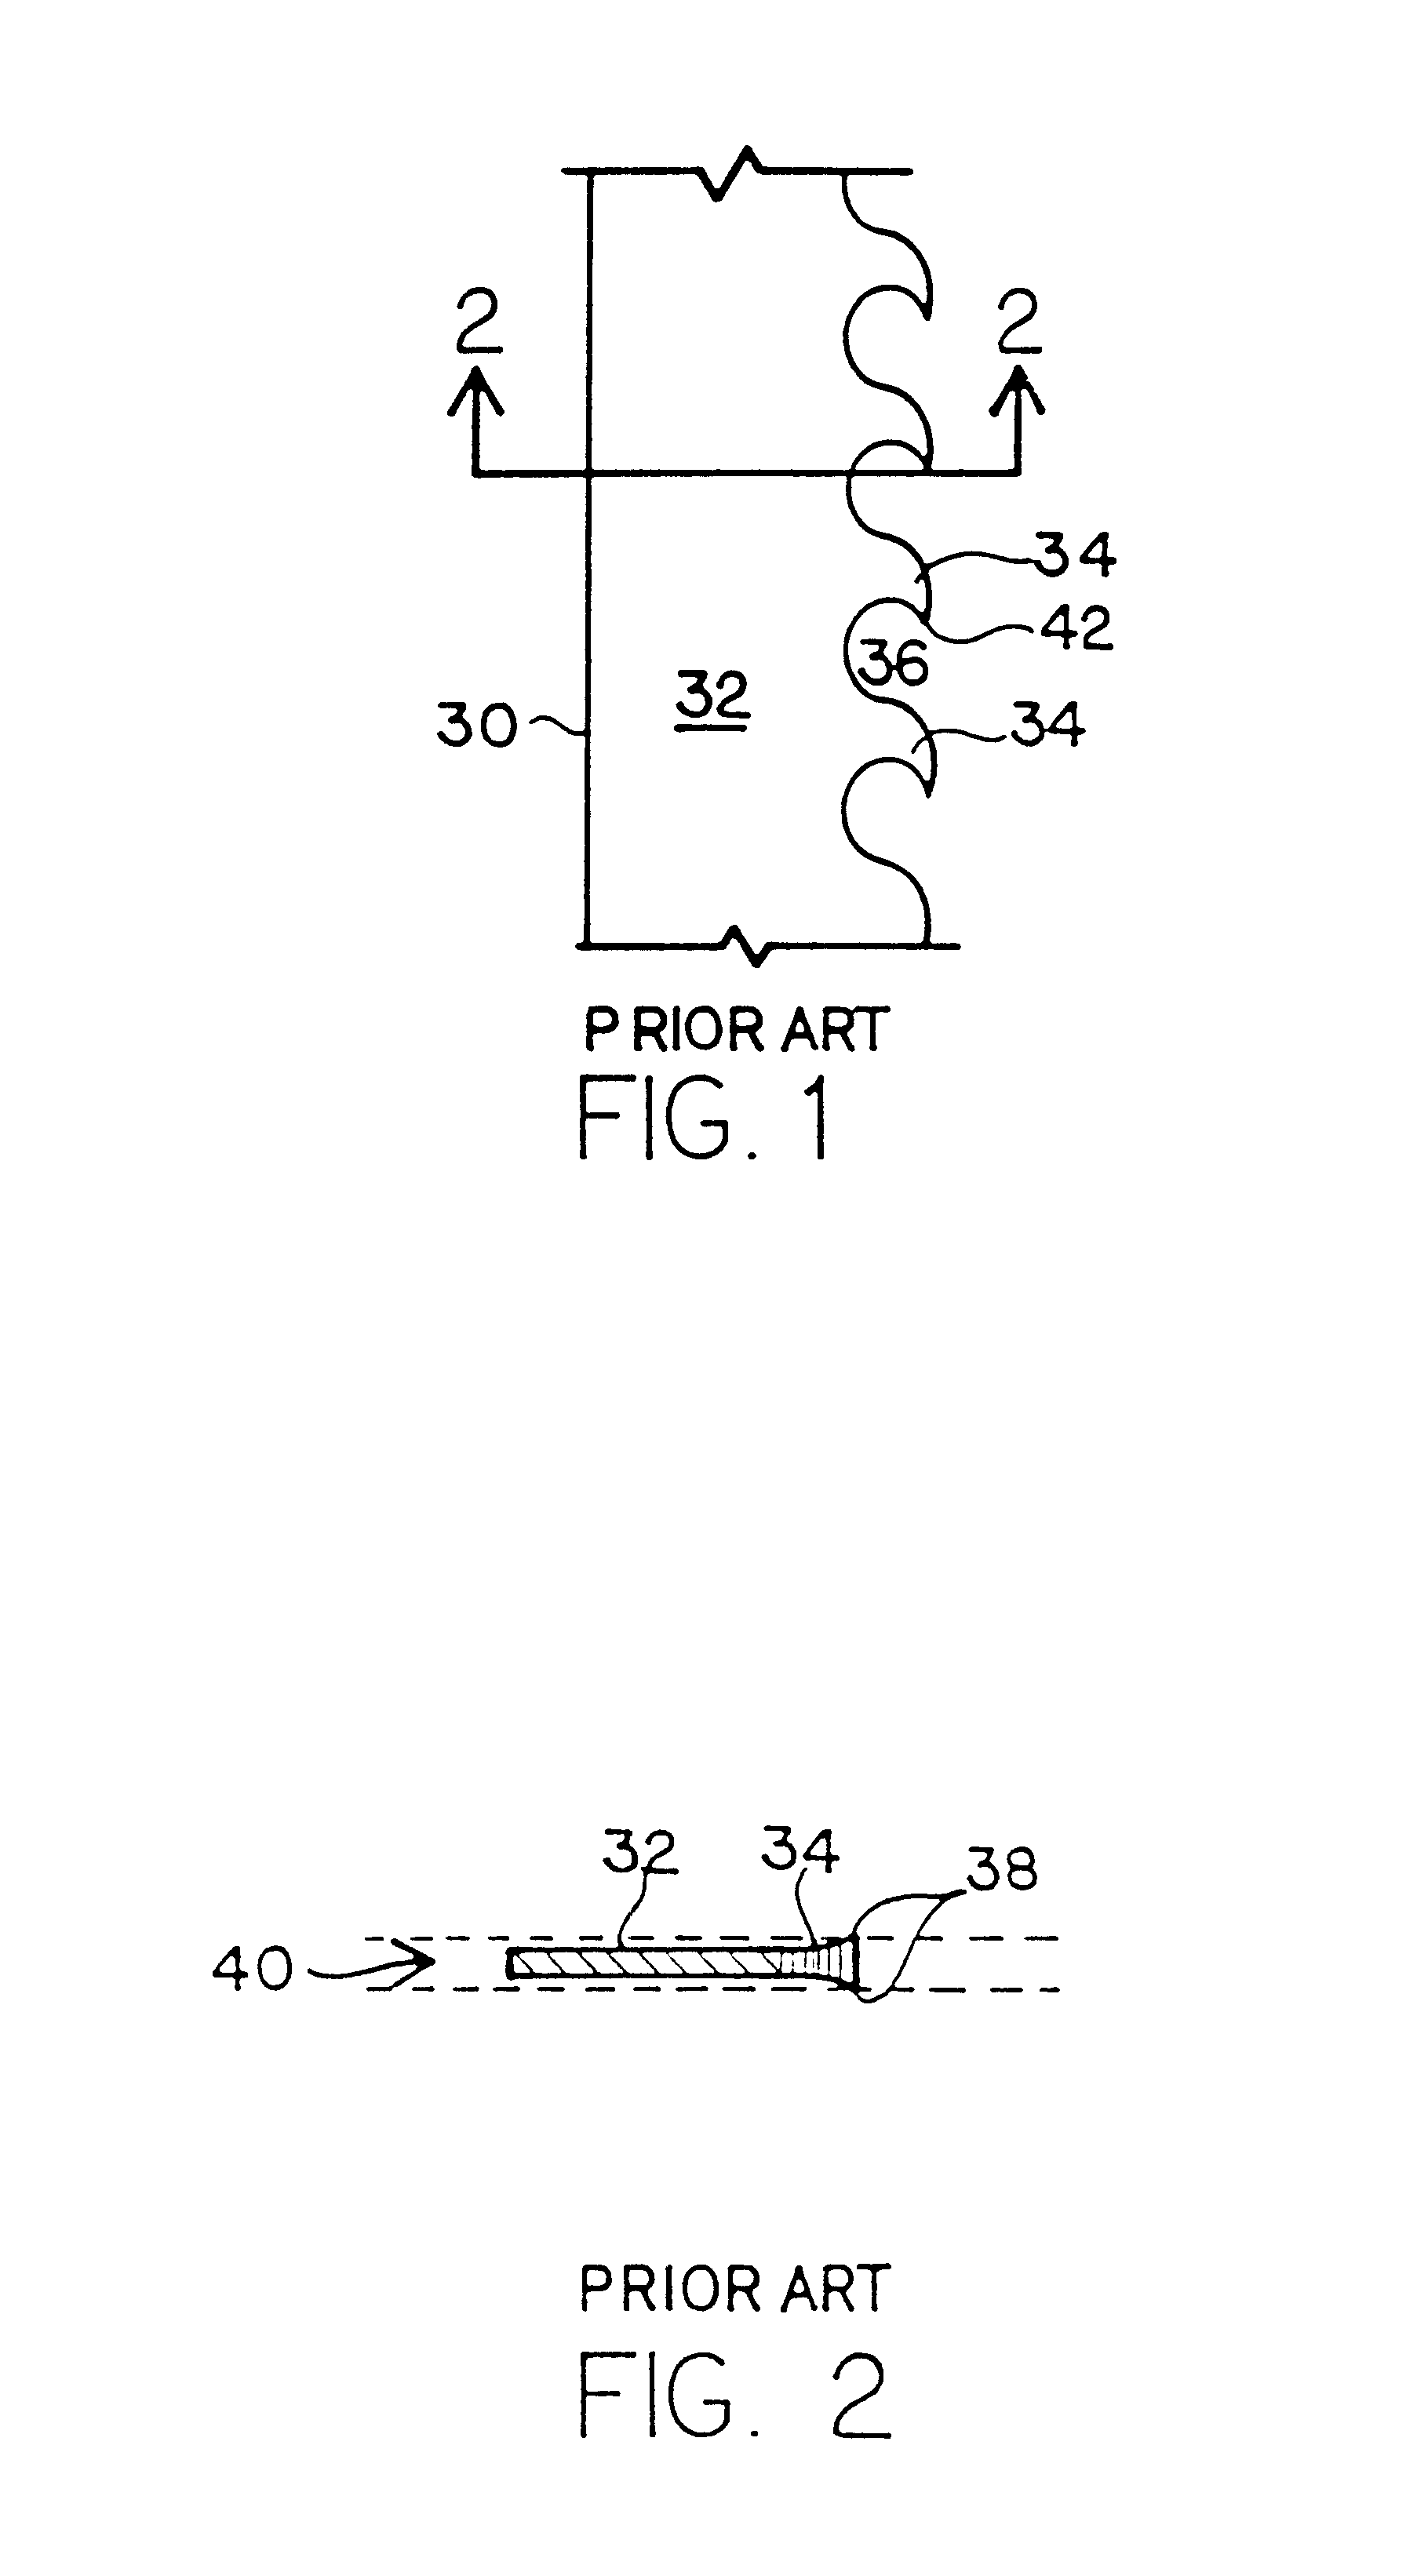 Apparatus for controlling work feed rate for cutting wood, metal and other materials